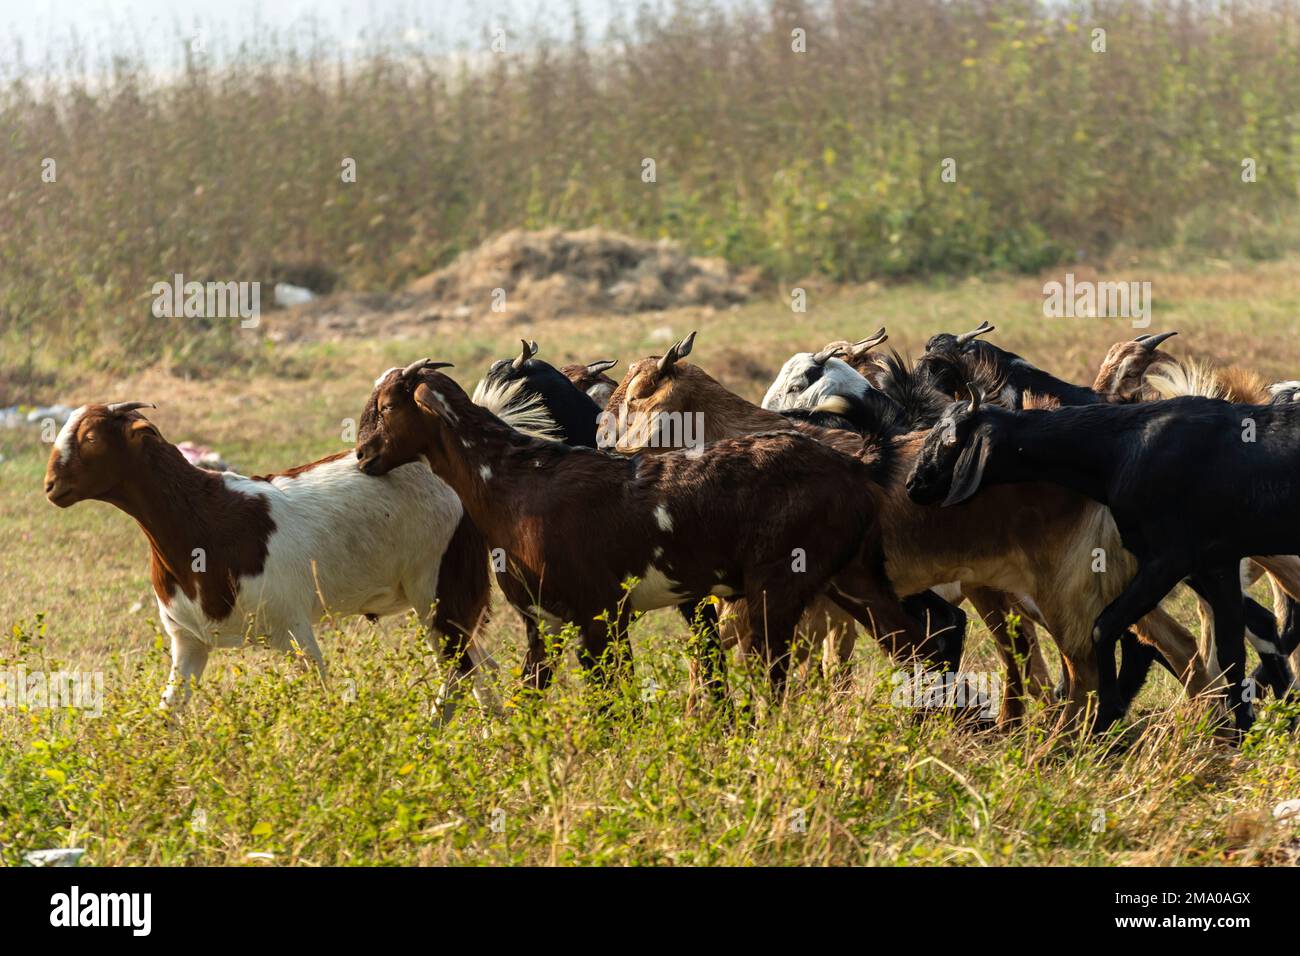 A group of Goat is eating and grazing grass. Stock Photo